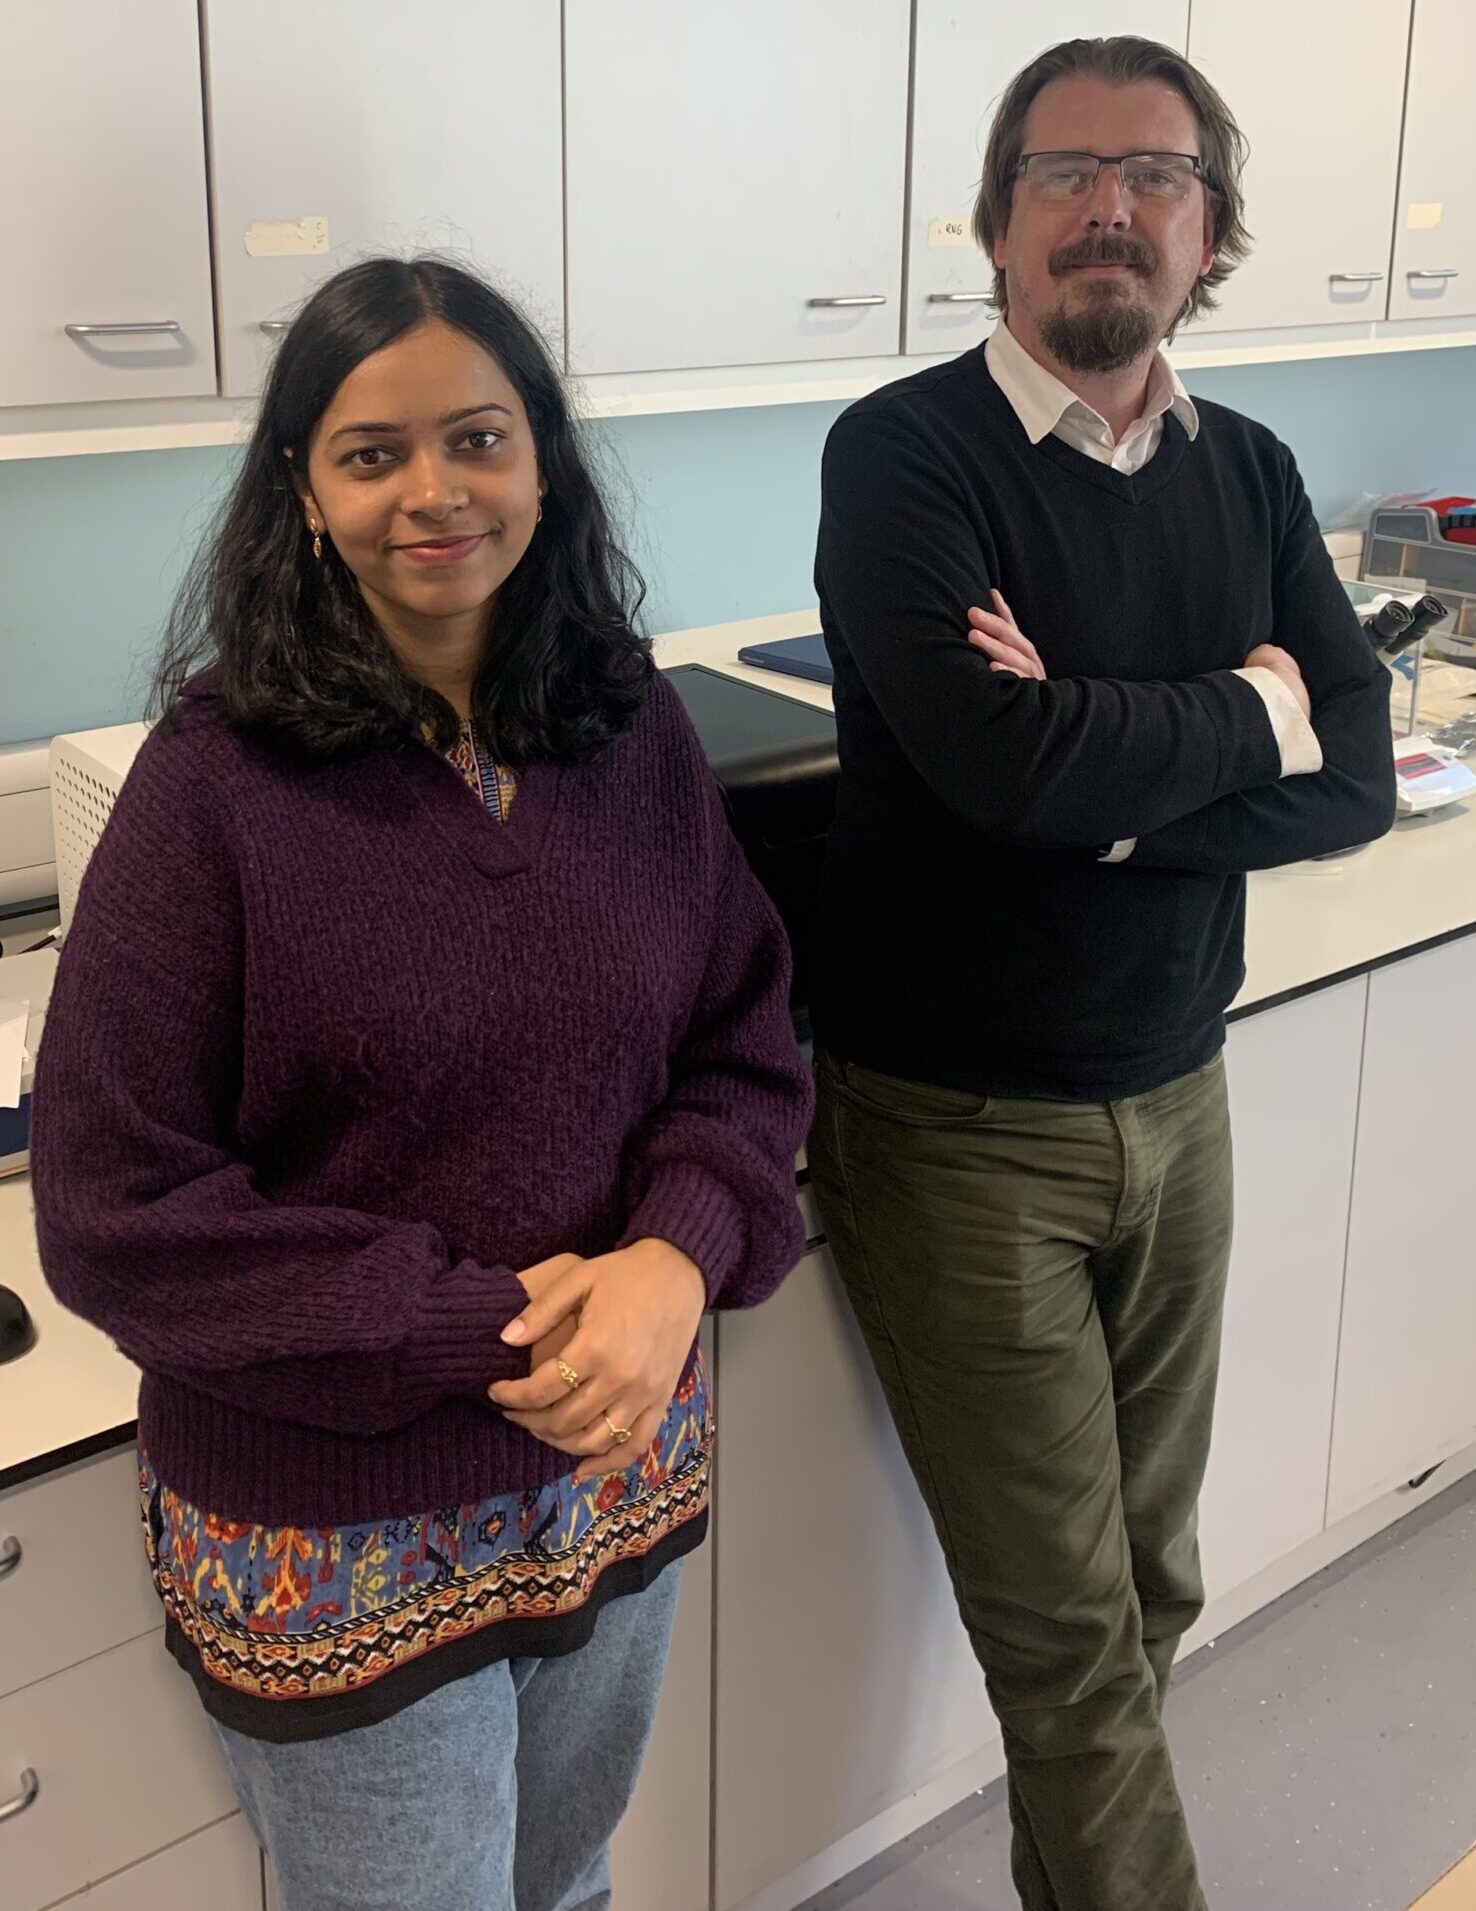 Sagarika (left) and Ross (right) they are stood in a lab in front of a workbench.